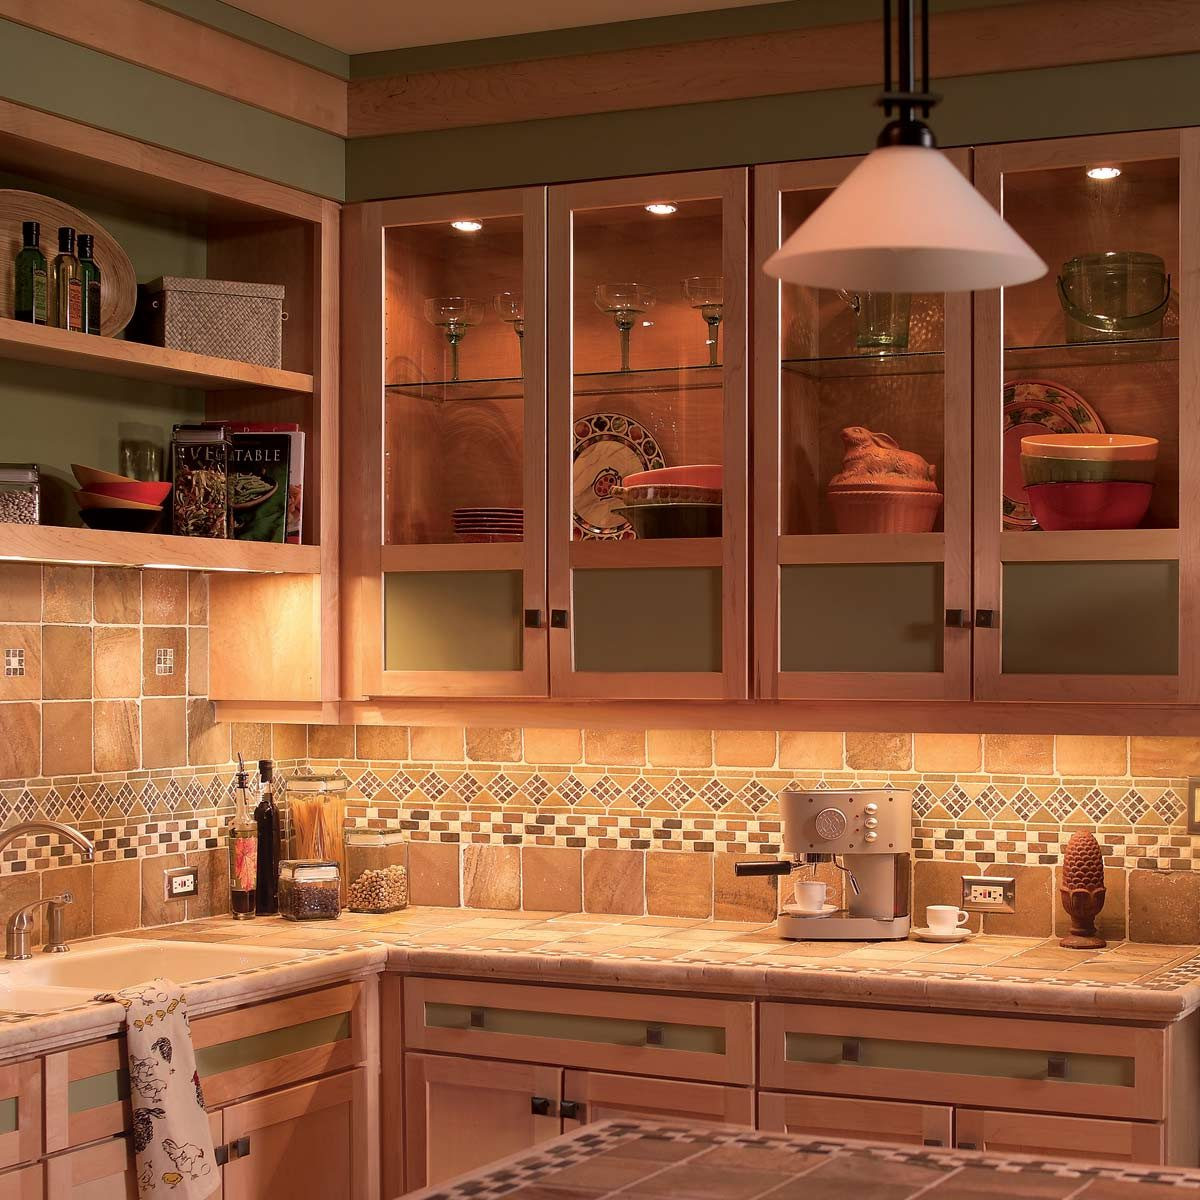 Kitchen Lighting Under Cabinet
 How to Install Under Cabinet Lighting in Your Kitchen